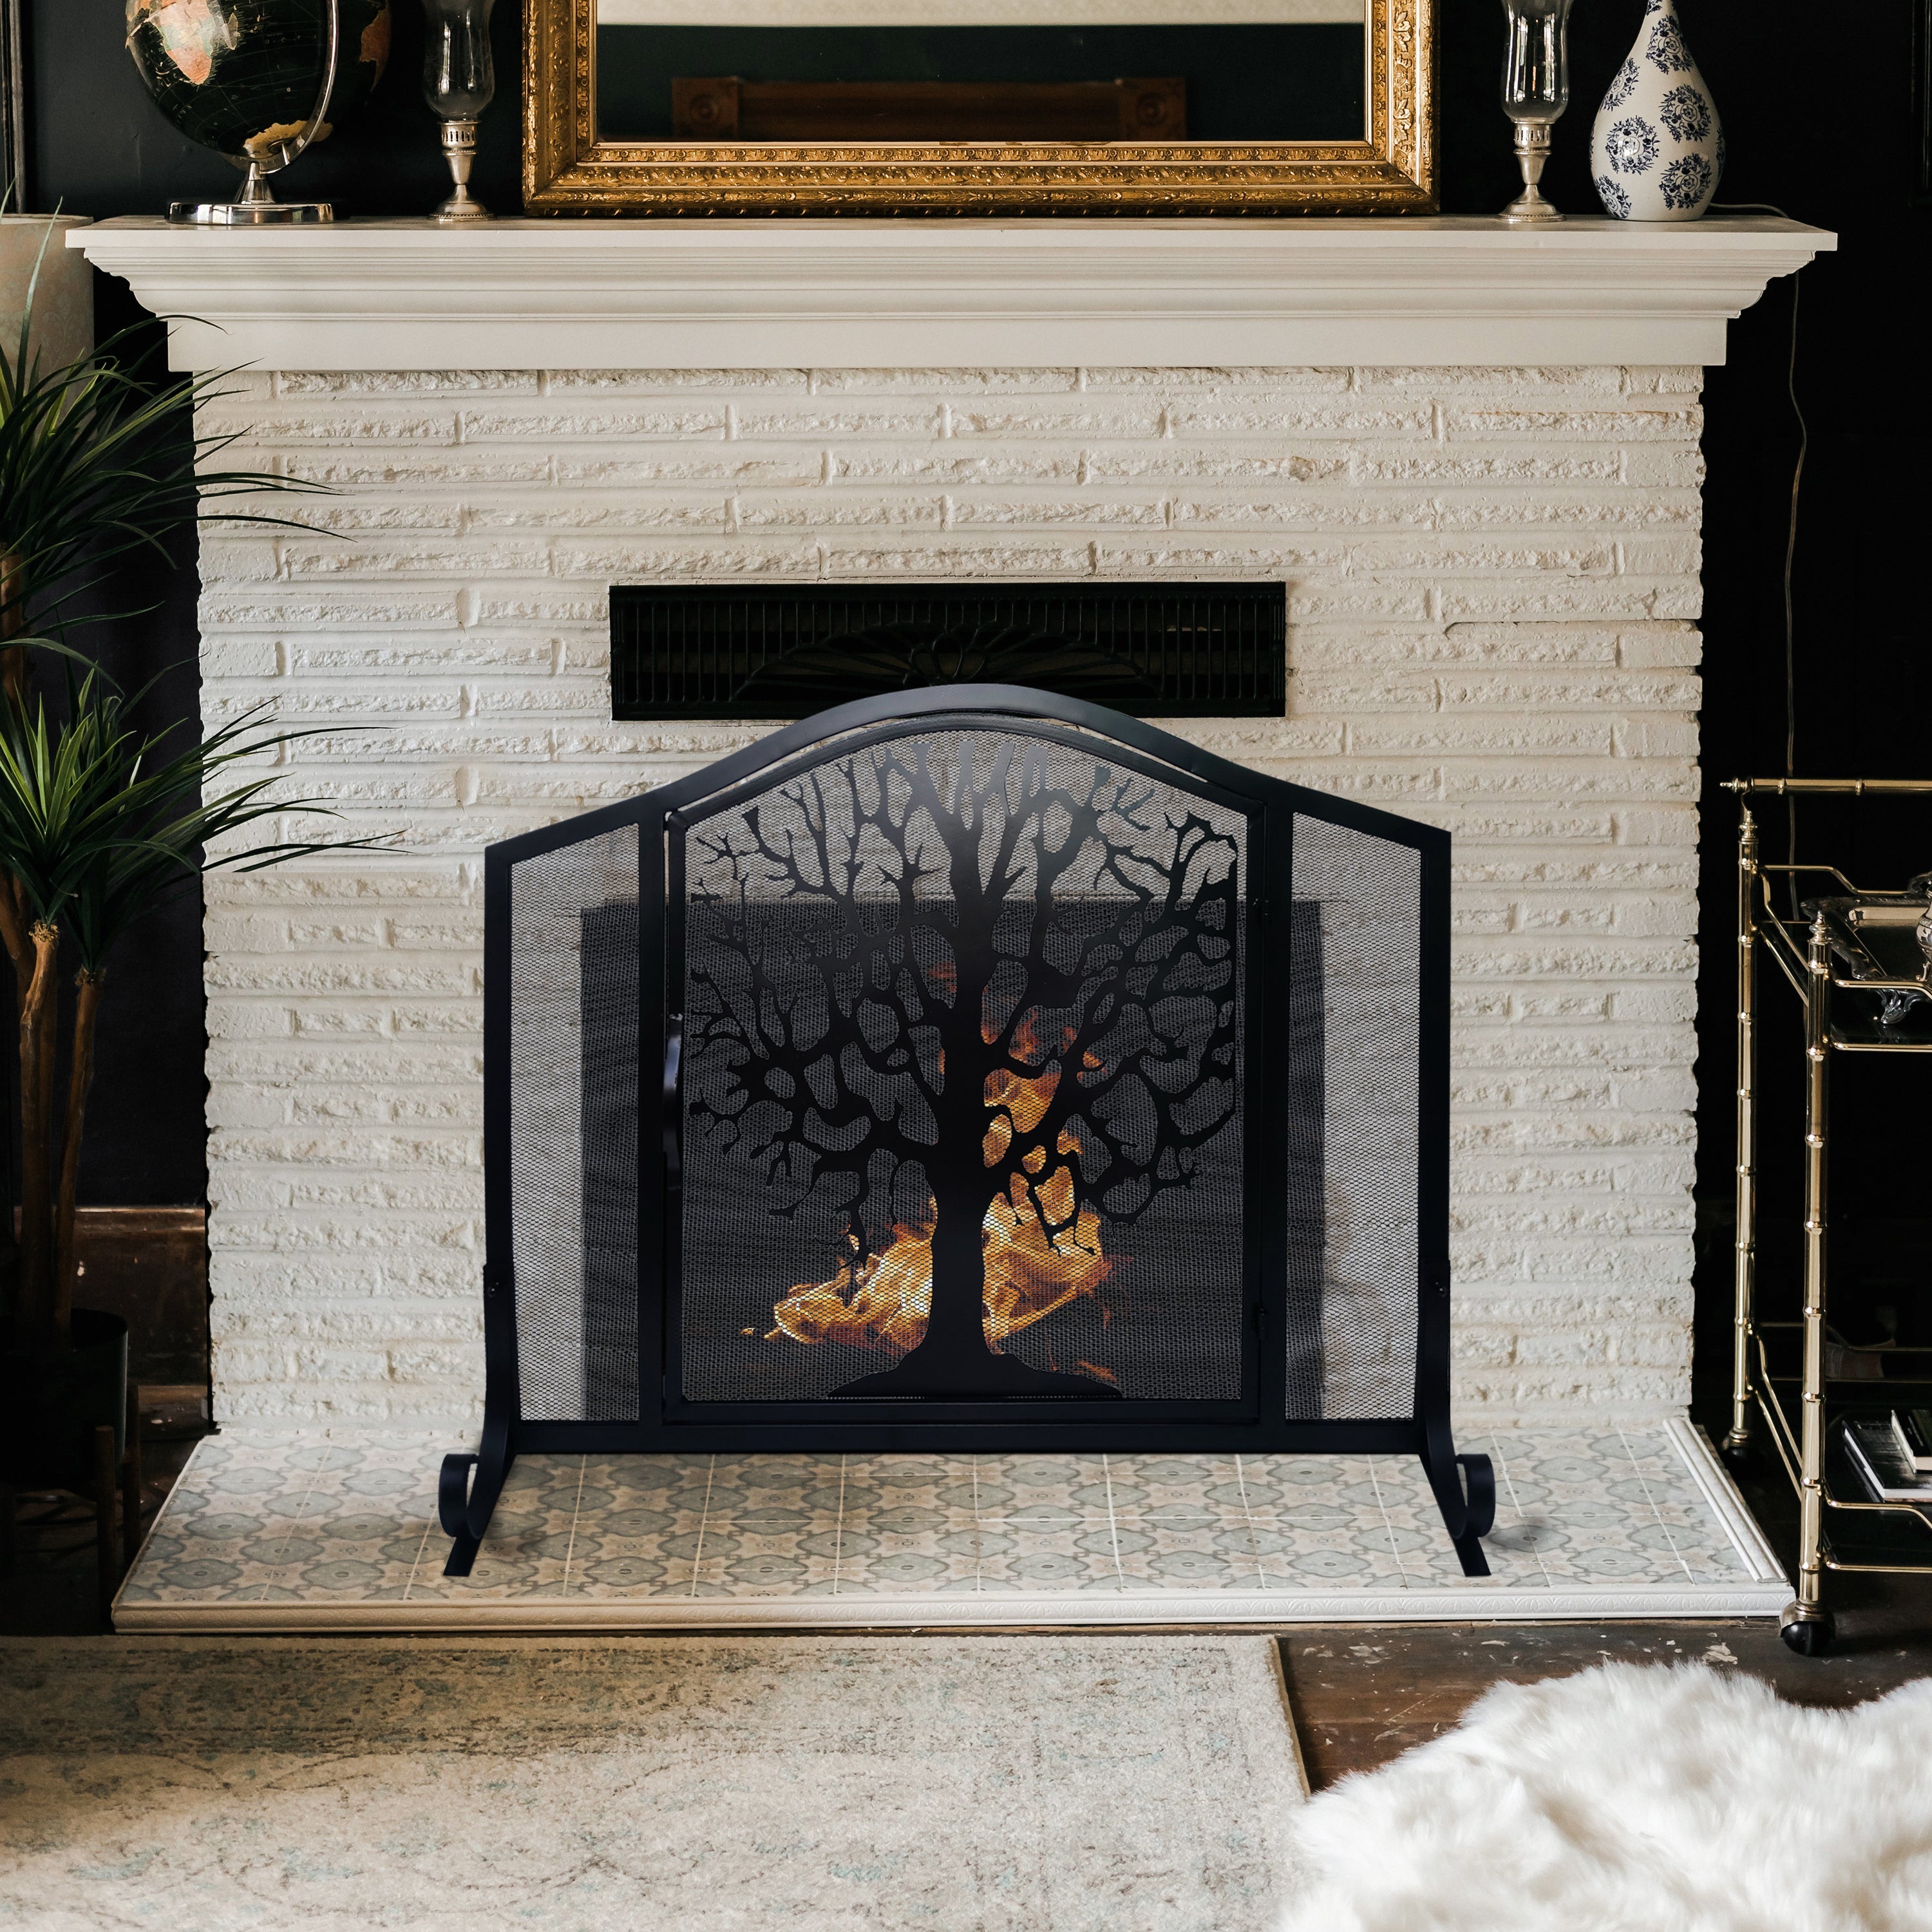 43 Inches 3 Panel Iron Fireplace Screen, Mesh Design, Arched Top, Tree of Life Art, Black By The Urban Port